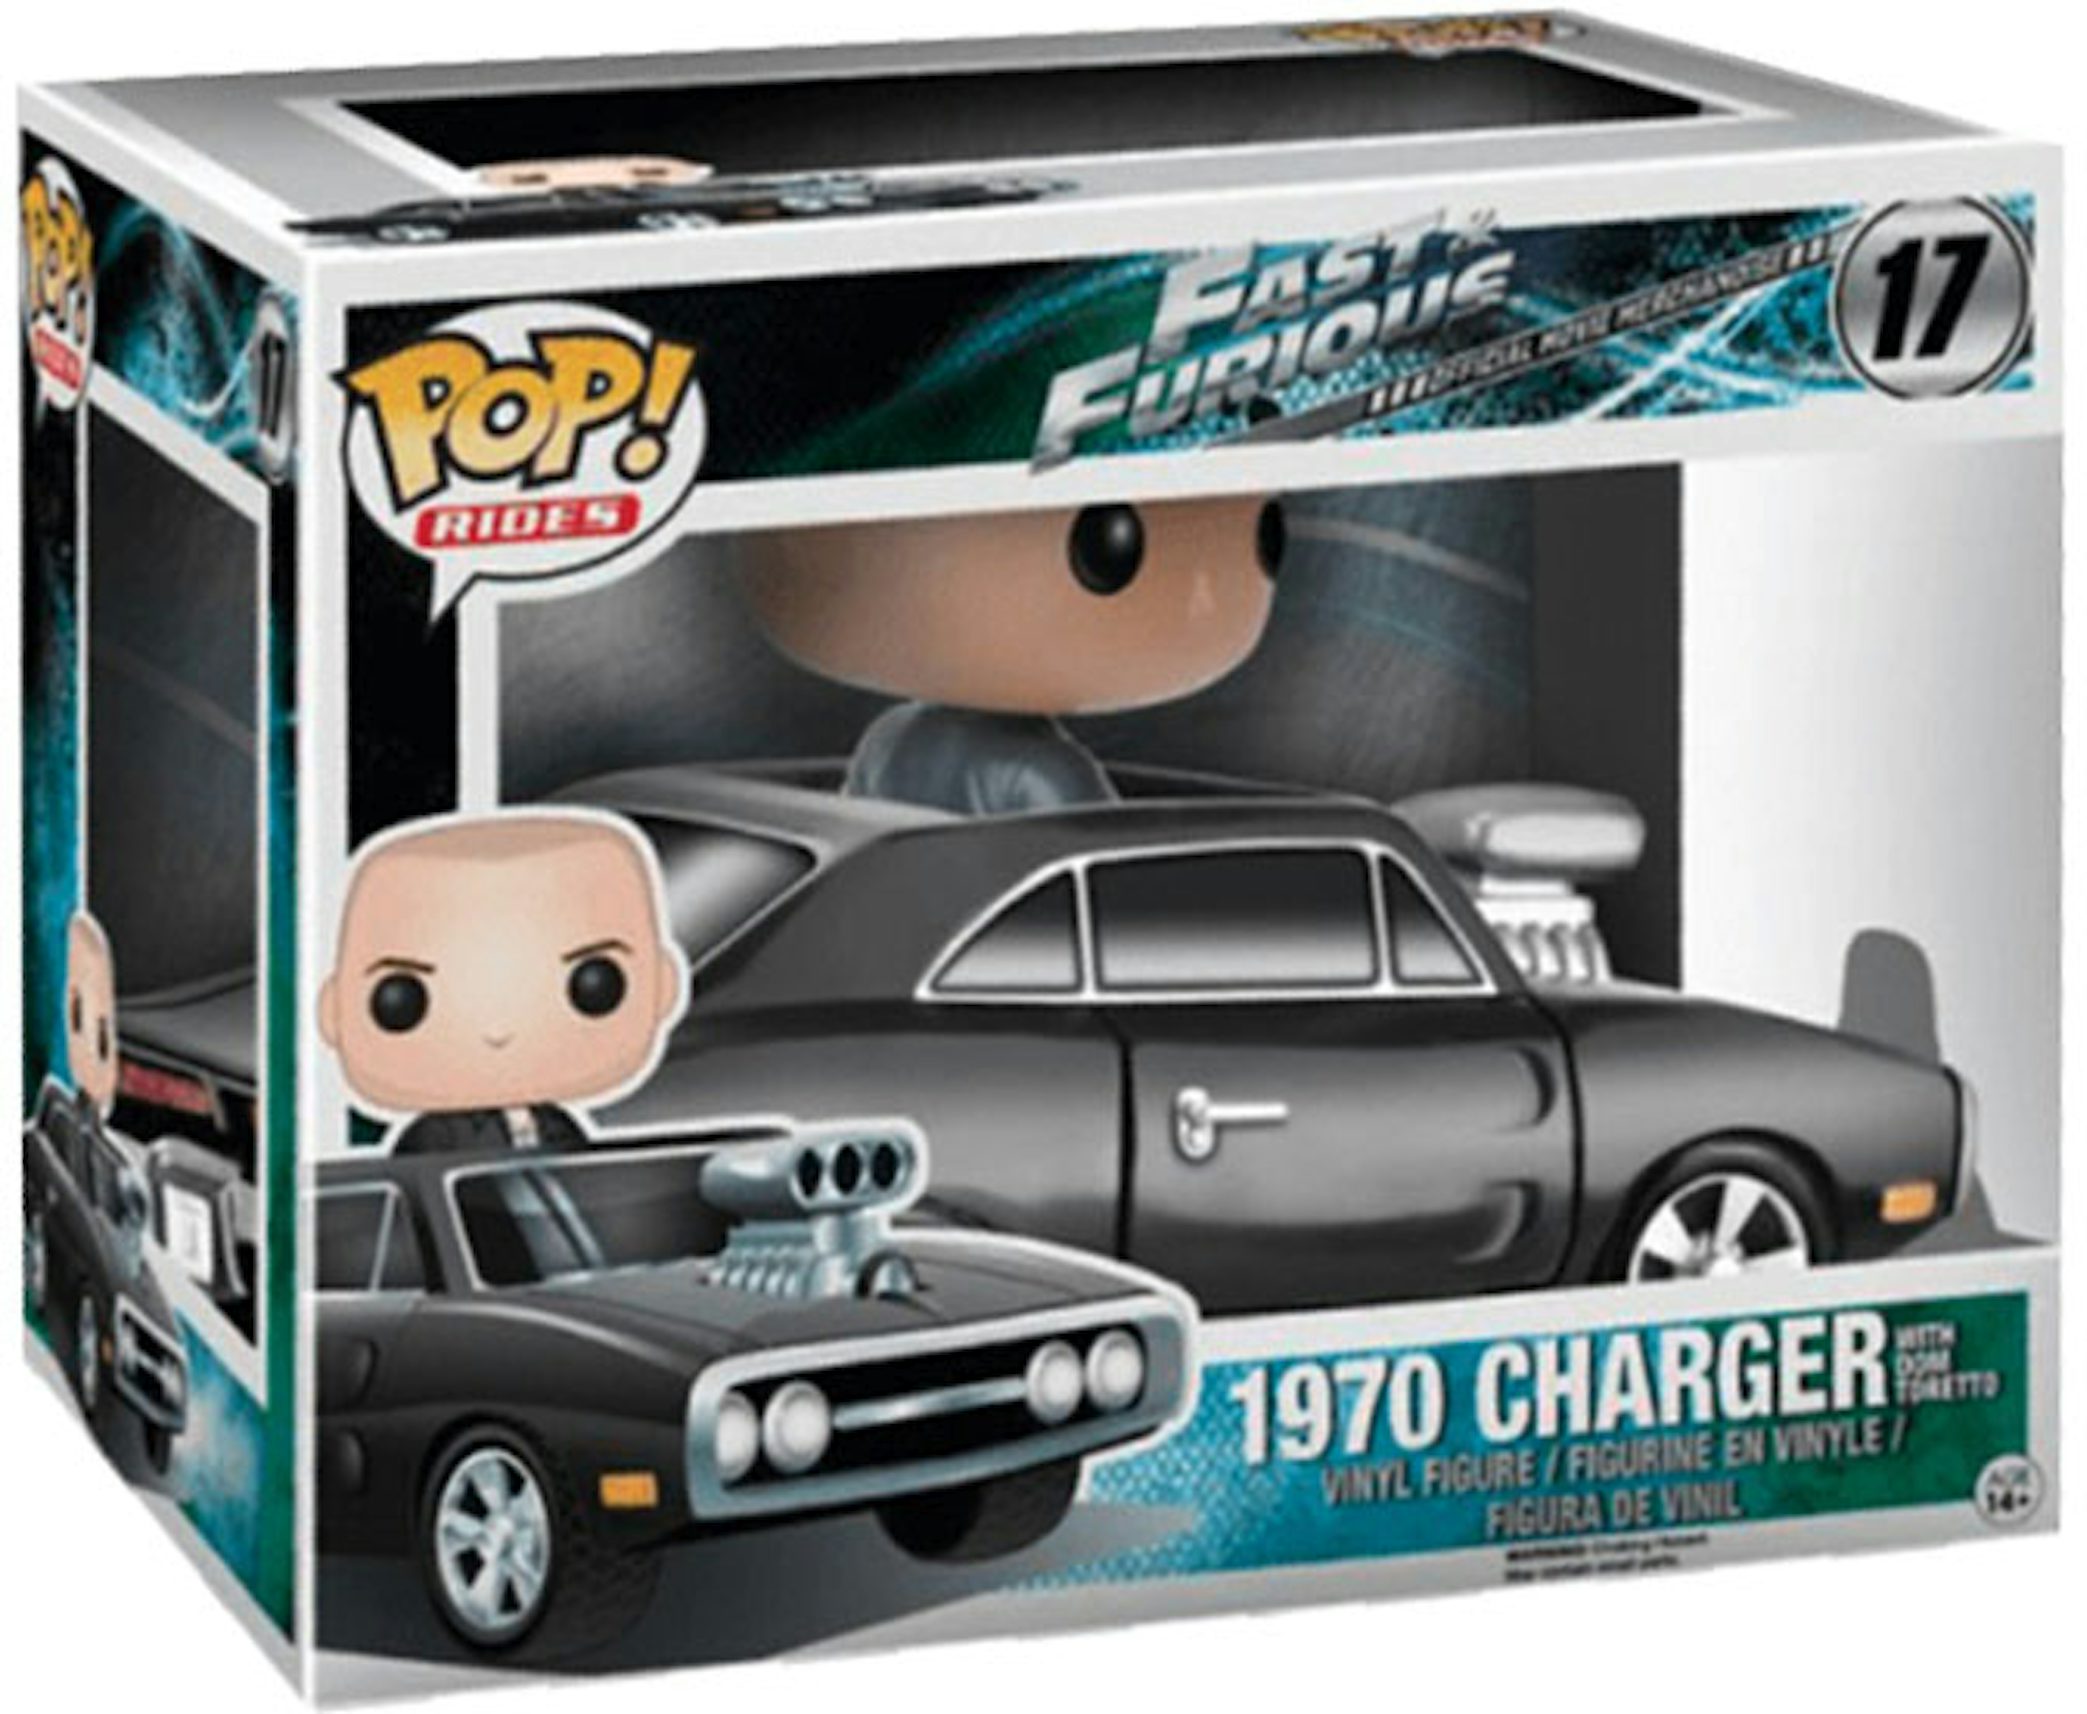 Funko Pop! Rides Fast & Furious 1970 Charger with Dom Toretto Figure #17 -  US